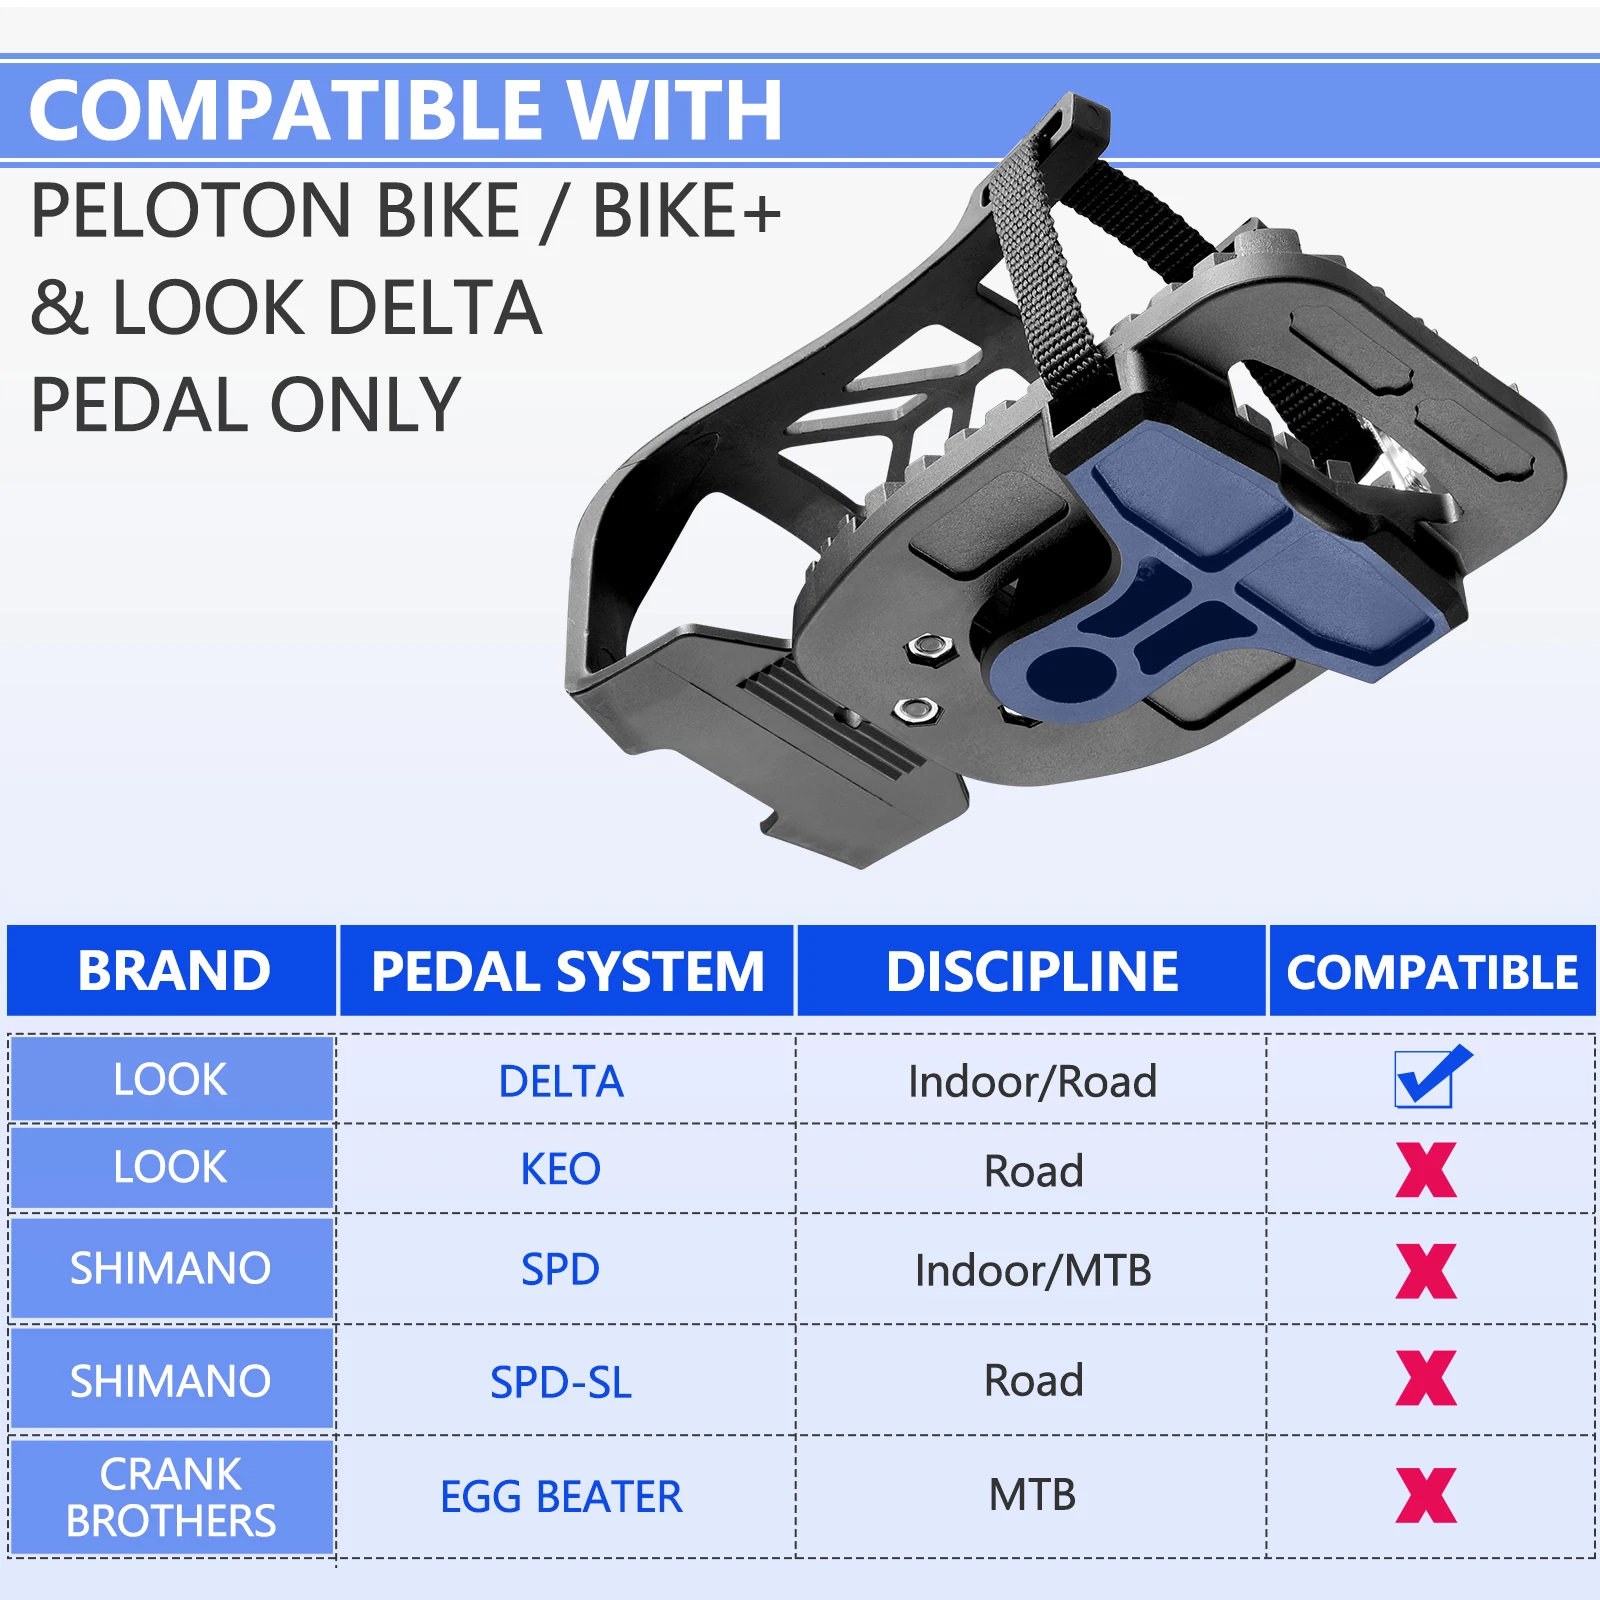 Spin Bike Pedal Compatible with Look Delta Clips - Ride with Sneakers-SAVA Carbon Bike